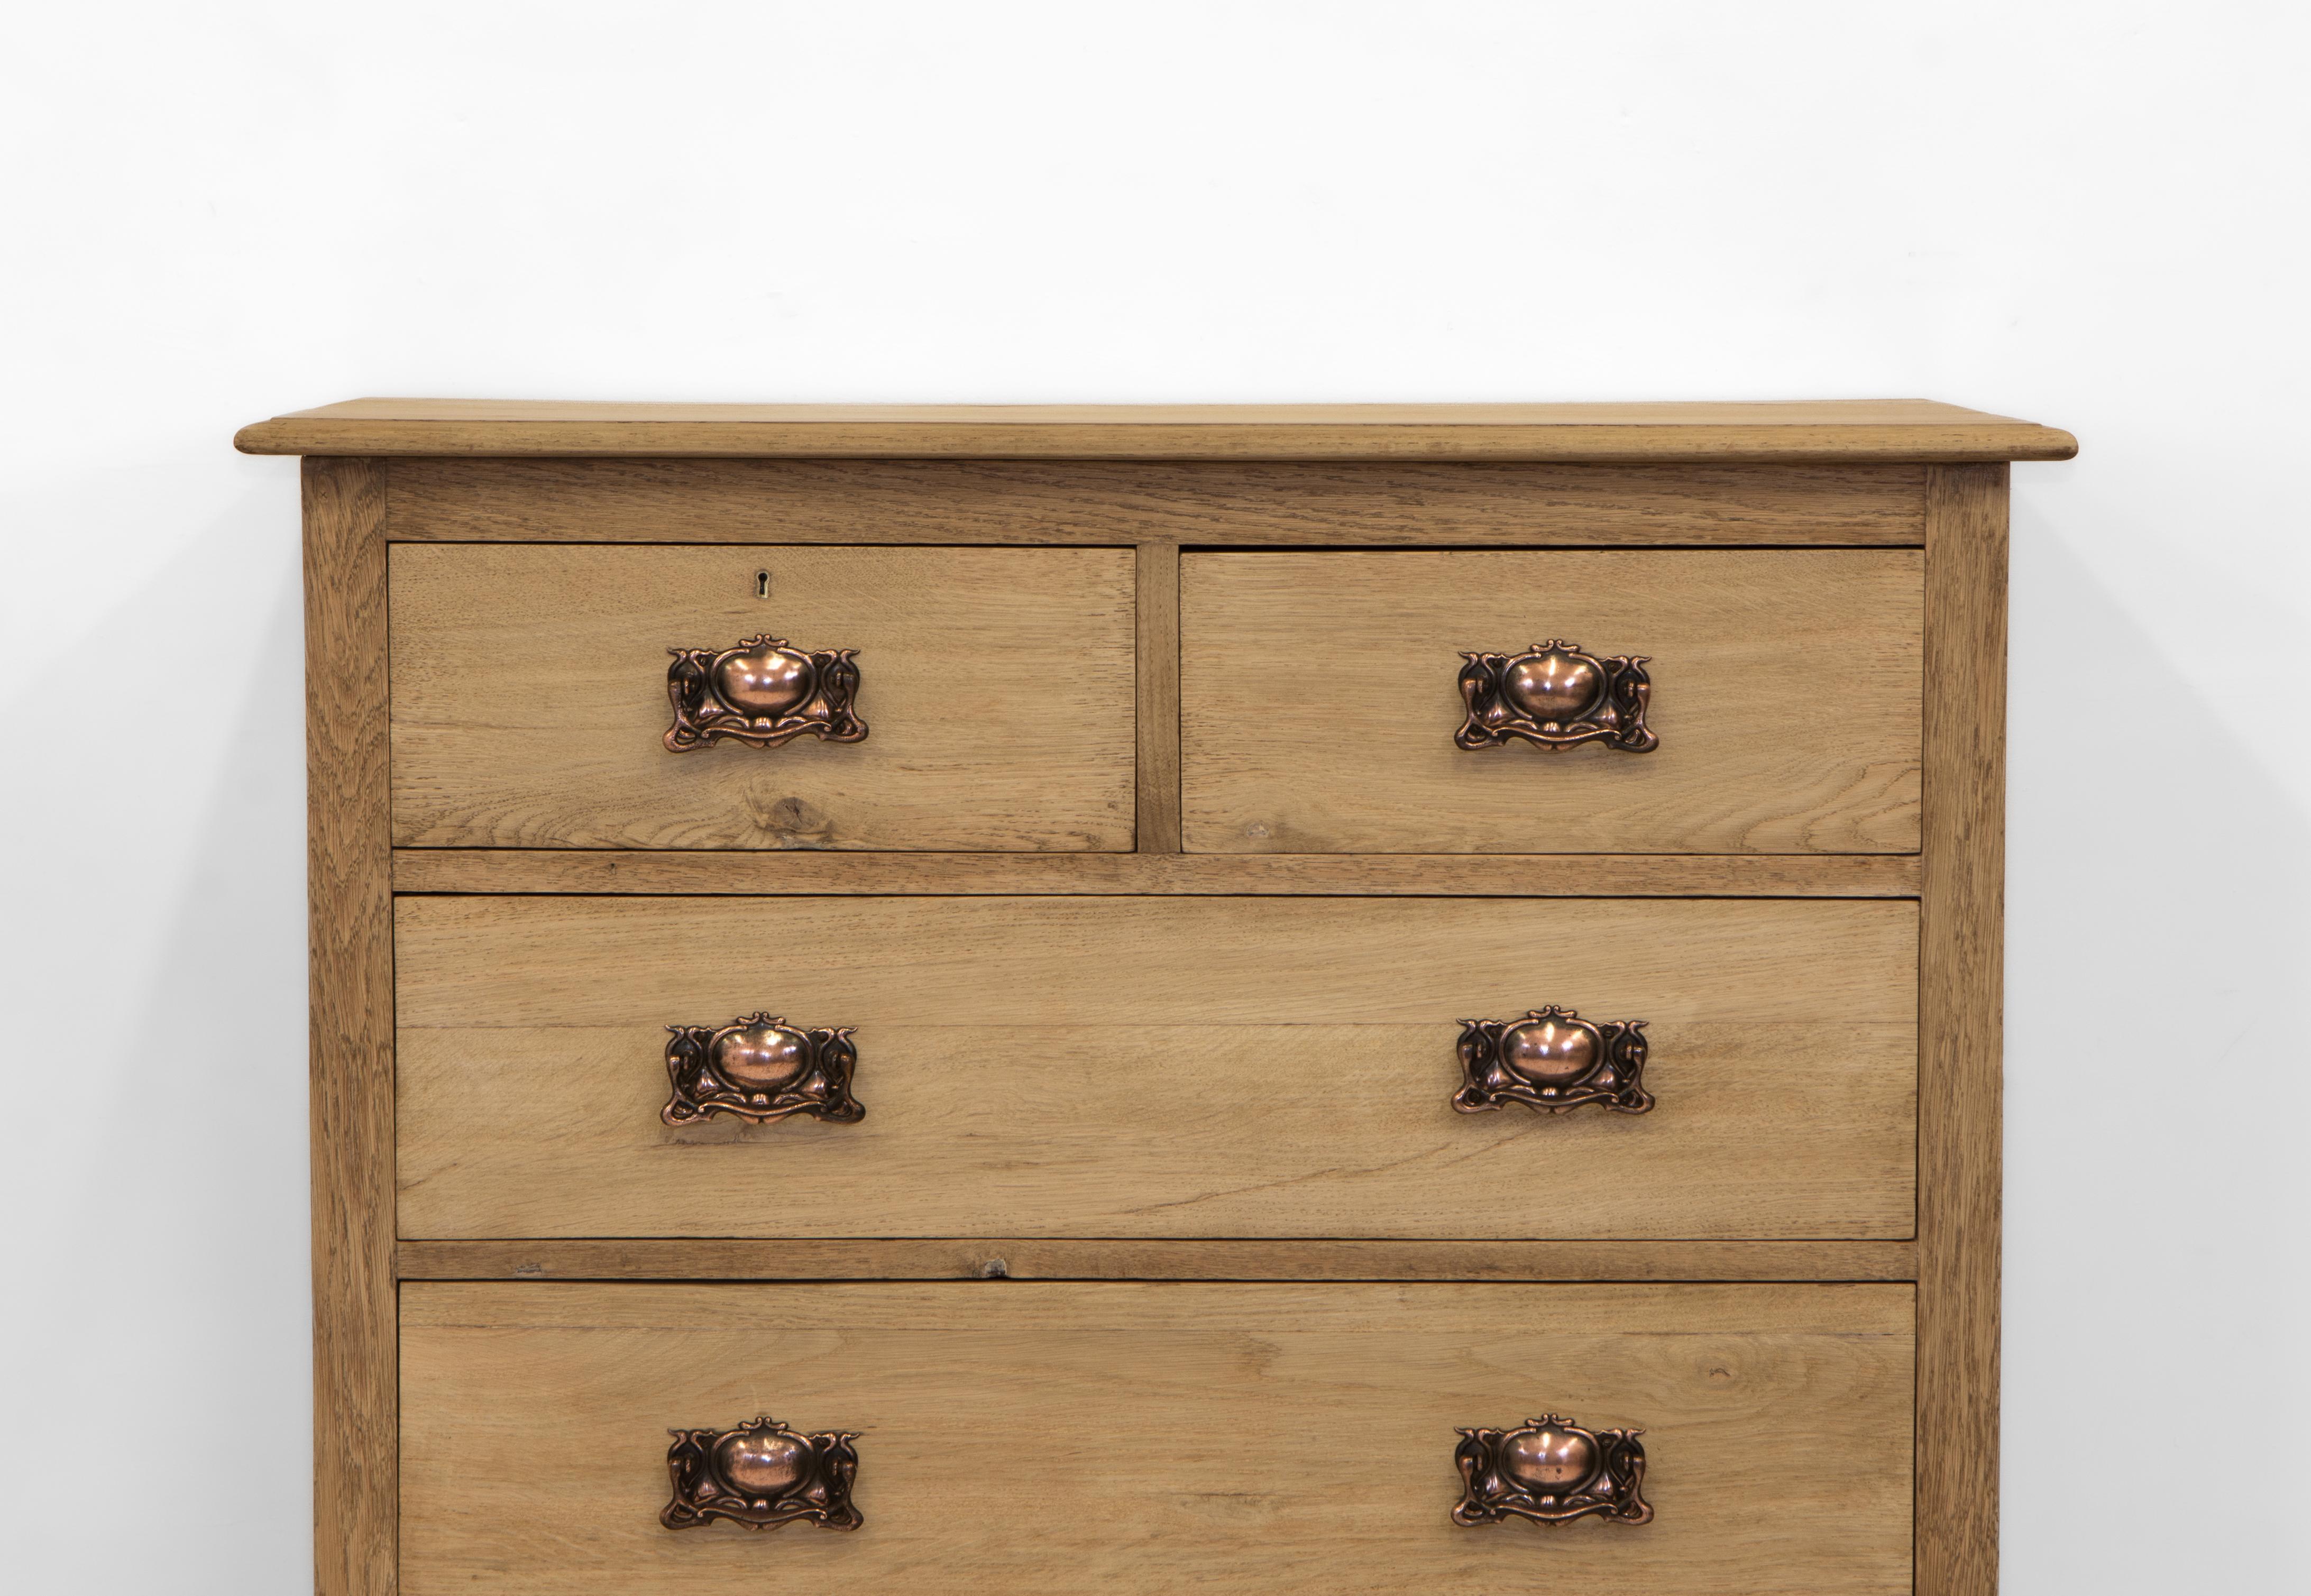 English Arts & Crafts Bleached Oak Chest Of Drawers Copper Handles 1